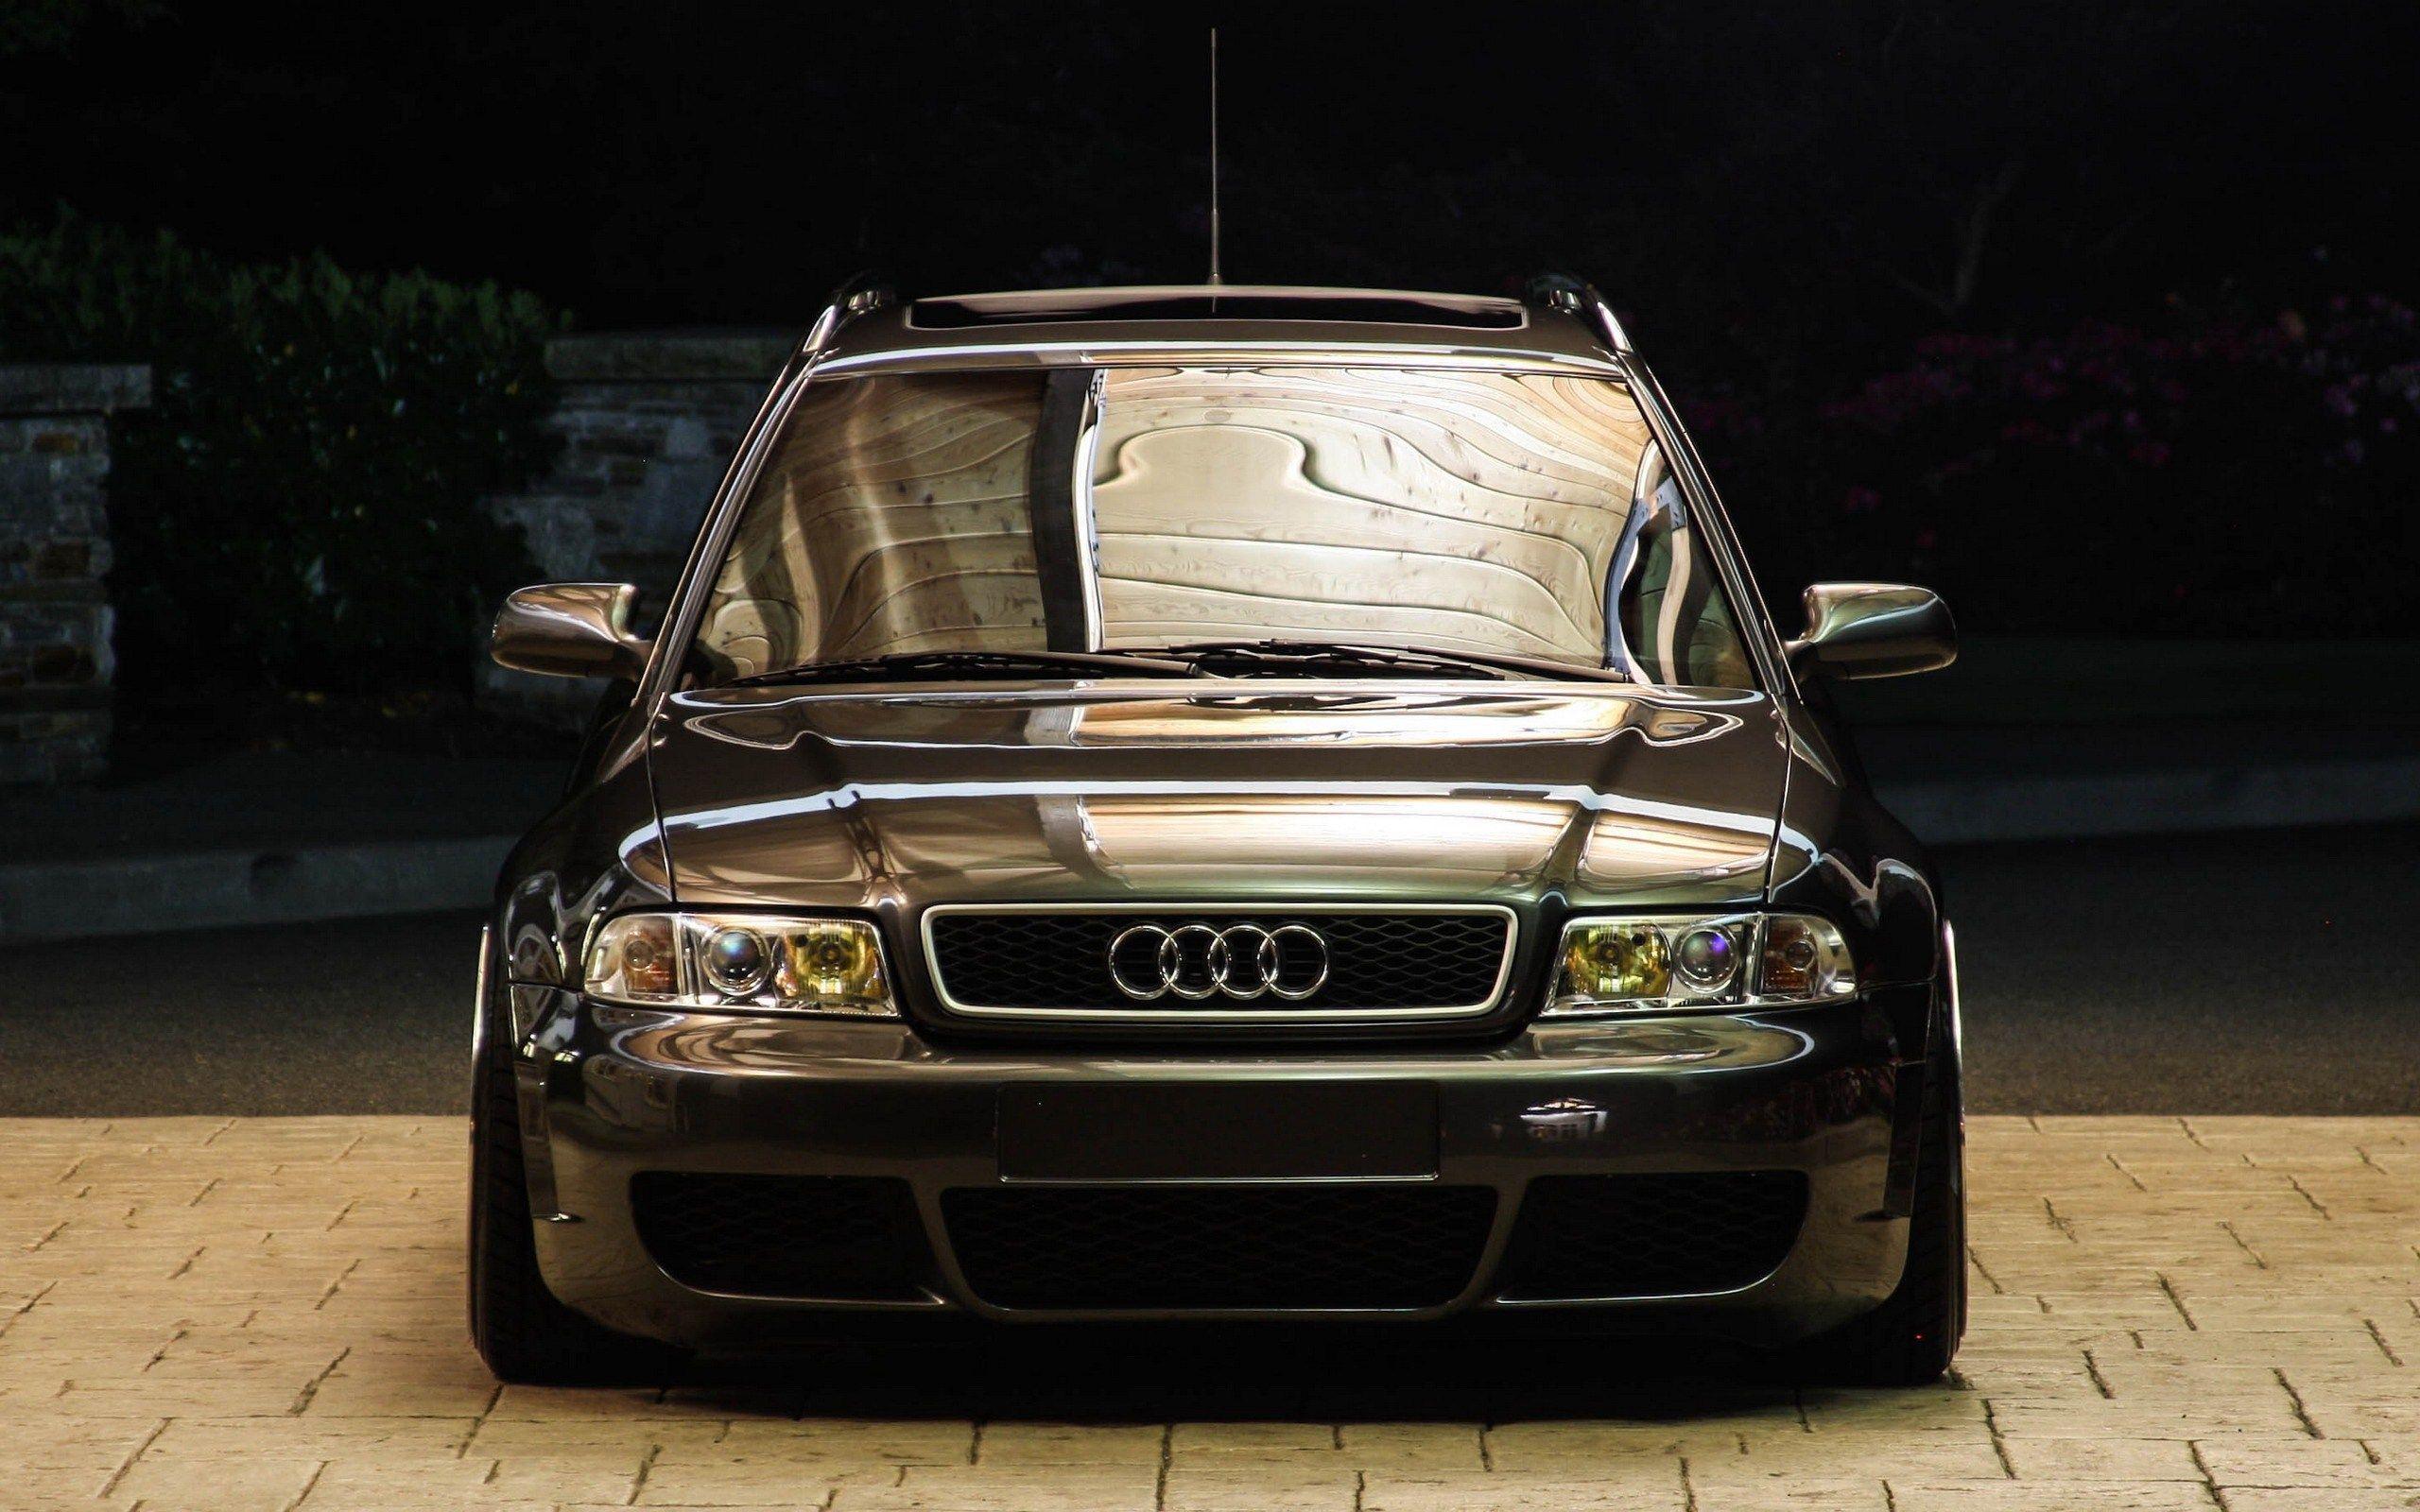 Audi B5 A4 Wallpapers Top Free Audi B5 A4 Backgrounds Wallpaperaccess